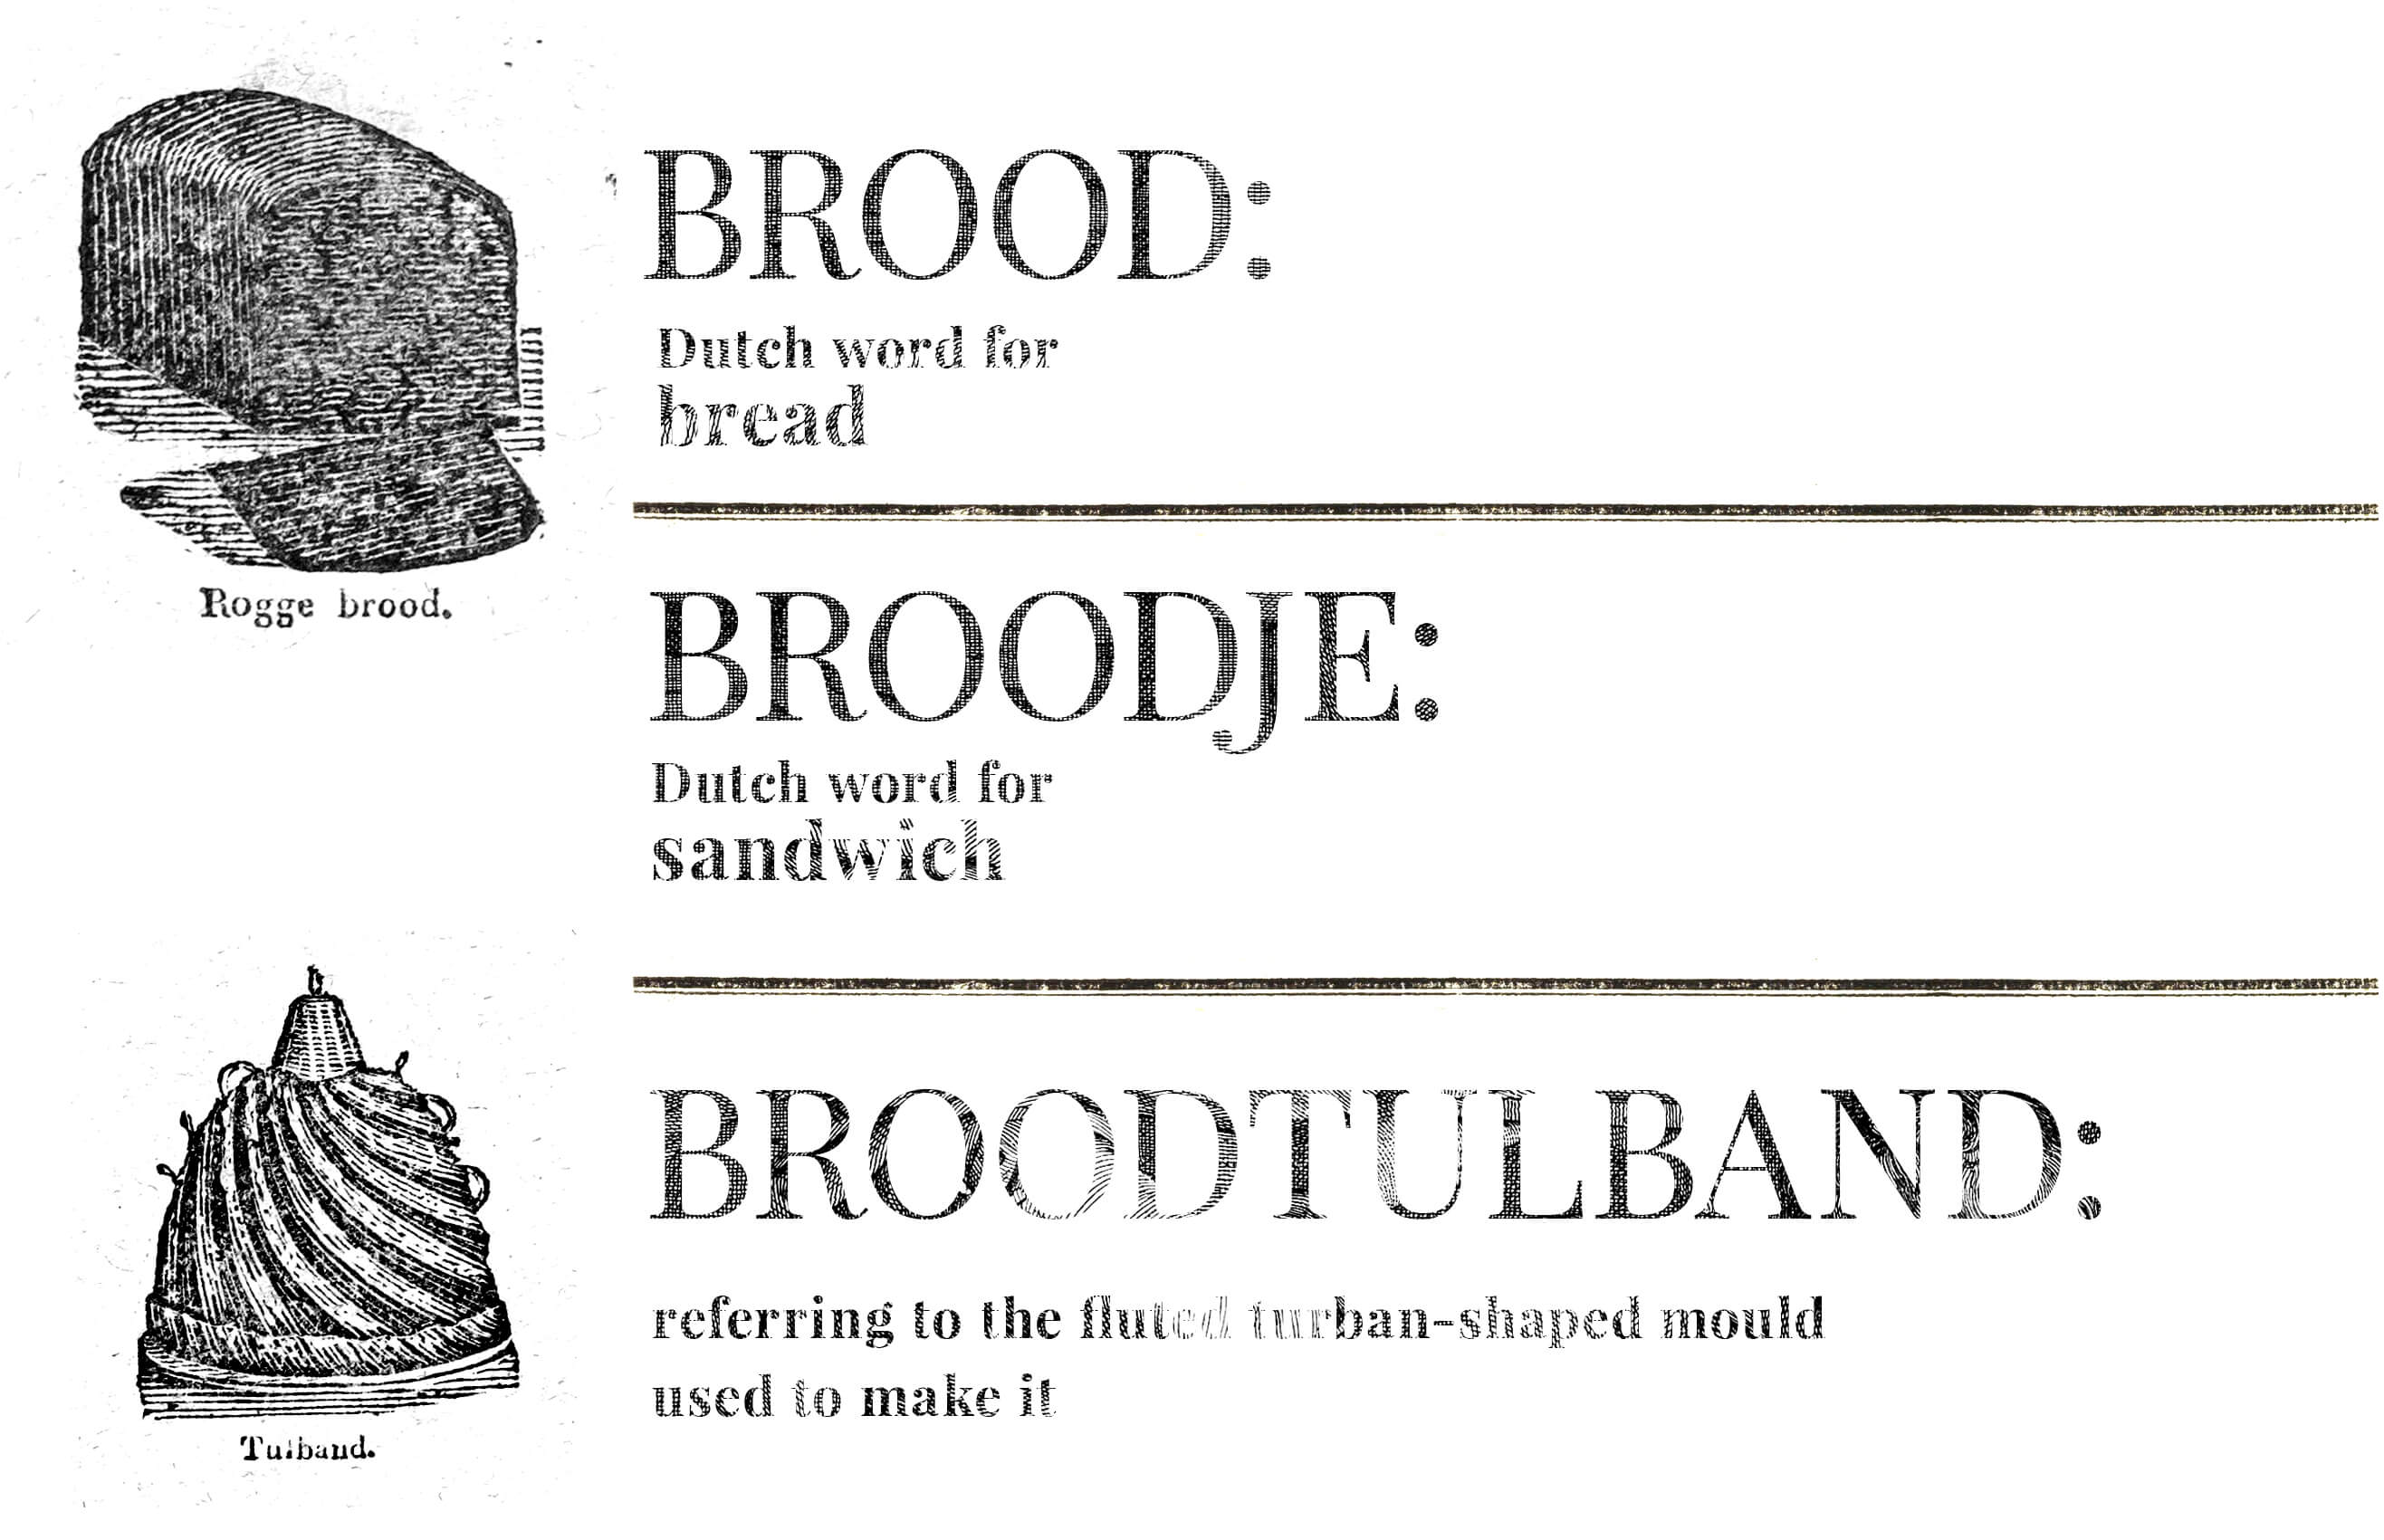 BREUDHER - THE STORY OF A DUTCH BREAD  -  The origin of the word breudher is uncertain. It is quite obvious that the root morpheme must be the Dutch word for bread, ‘brood.’ 